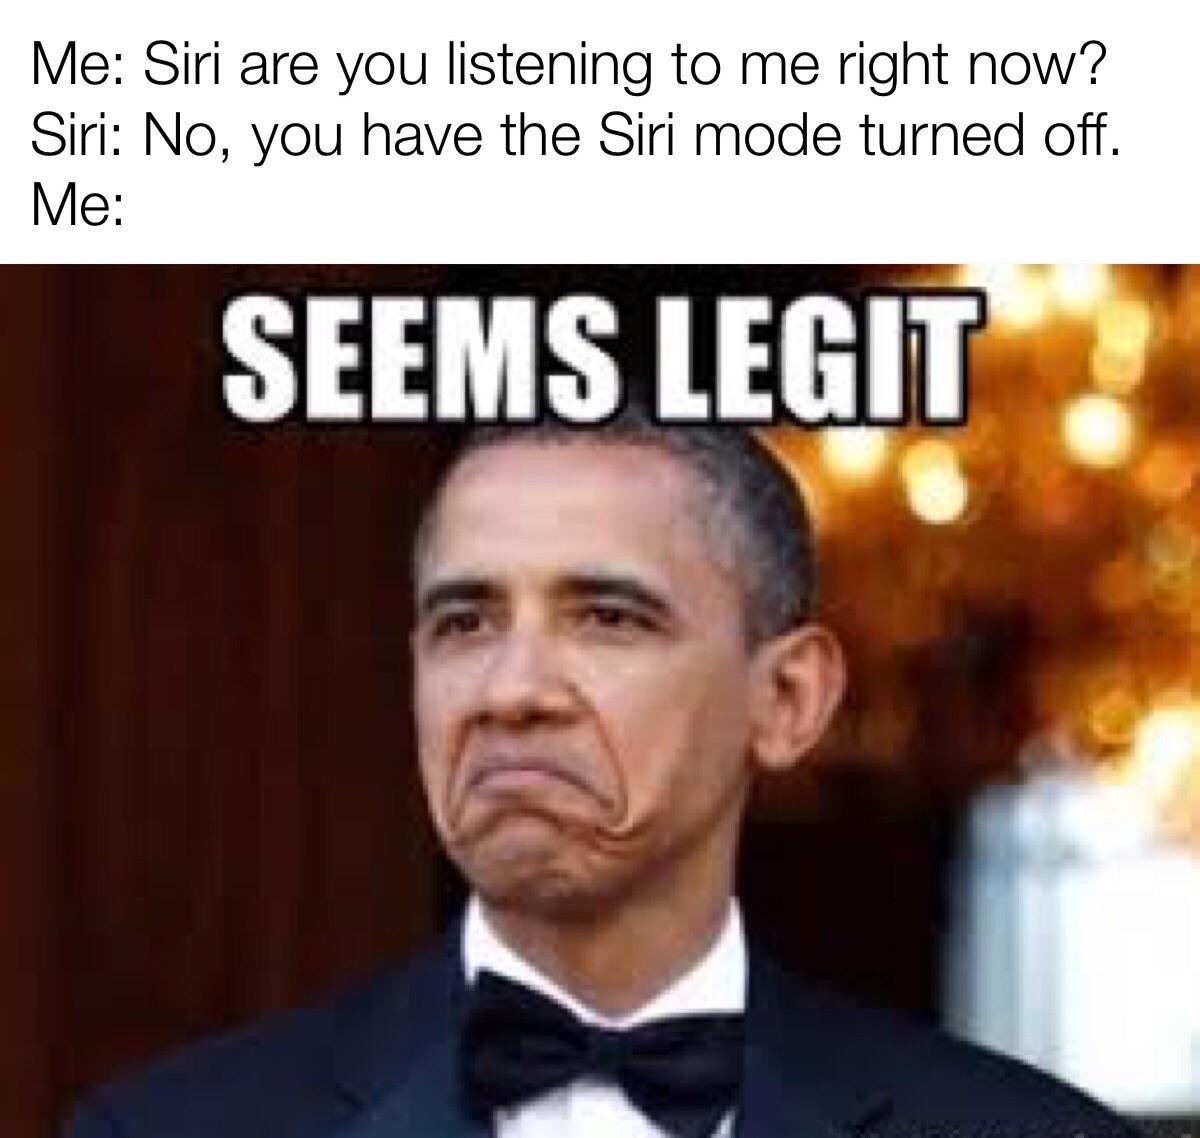 seems legit meme obama - Me Siri are you listening to me right now? Siri No, you have the Siri mode turned off. Me Seems Legit